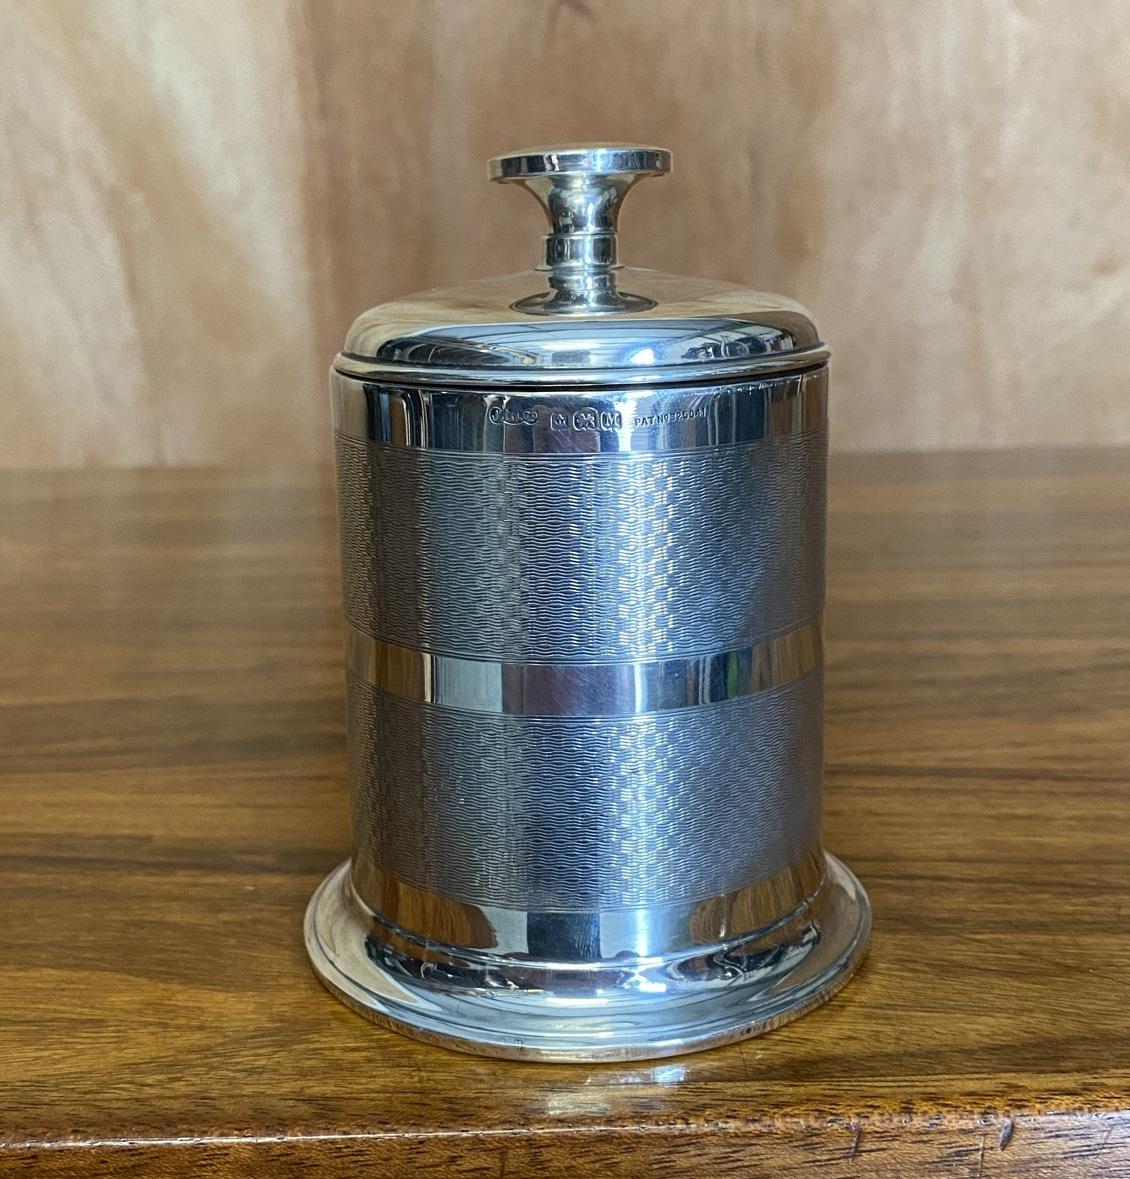 We are delighted to offer this lovely 1936 solid sterling silver art deco cigarette dispenser

A very good looking and well made piece, fully hallmarked with the sideways facing lion for Sterling Silver, the ships anchor for Birmingham, the date